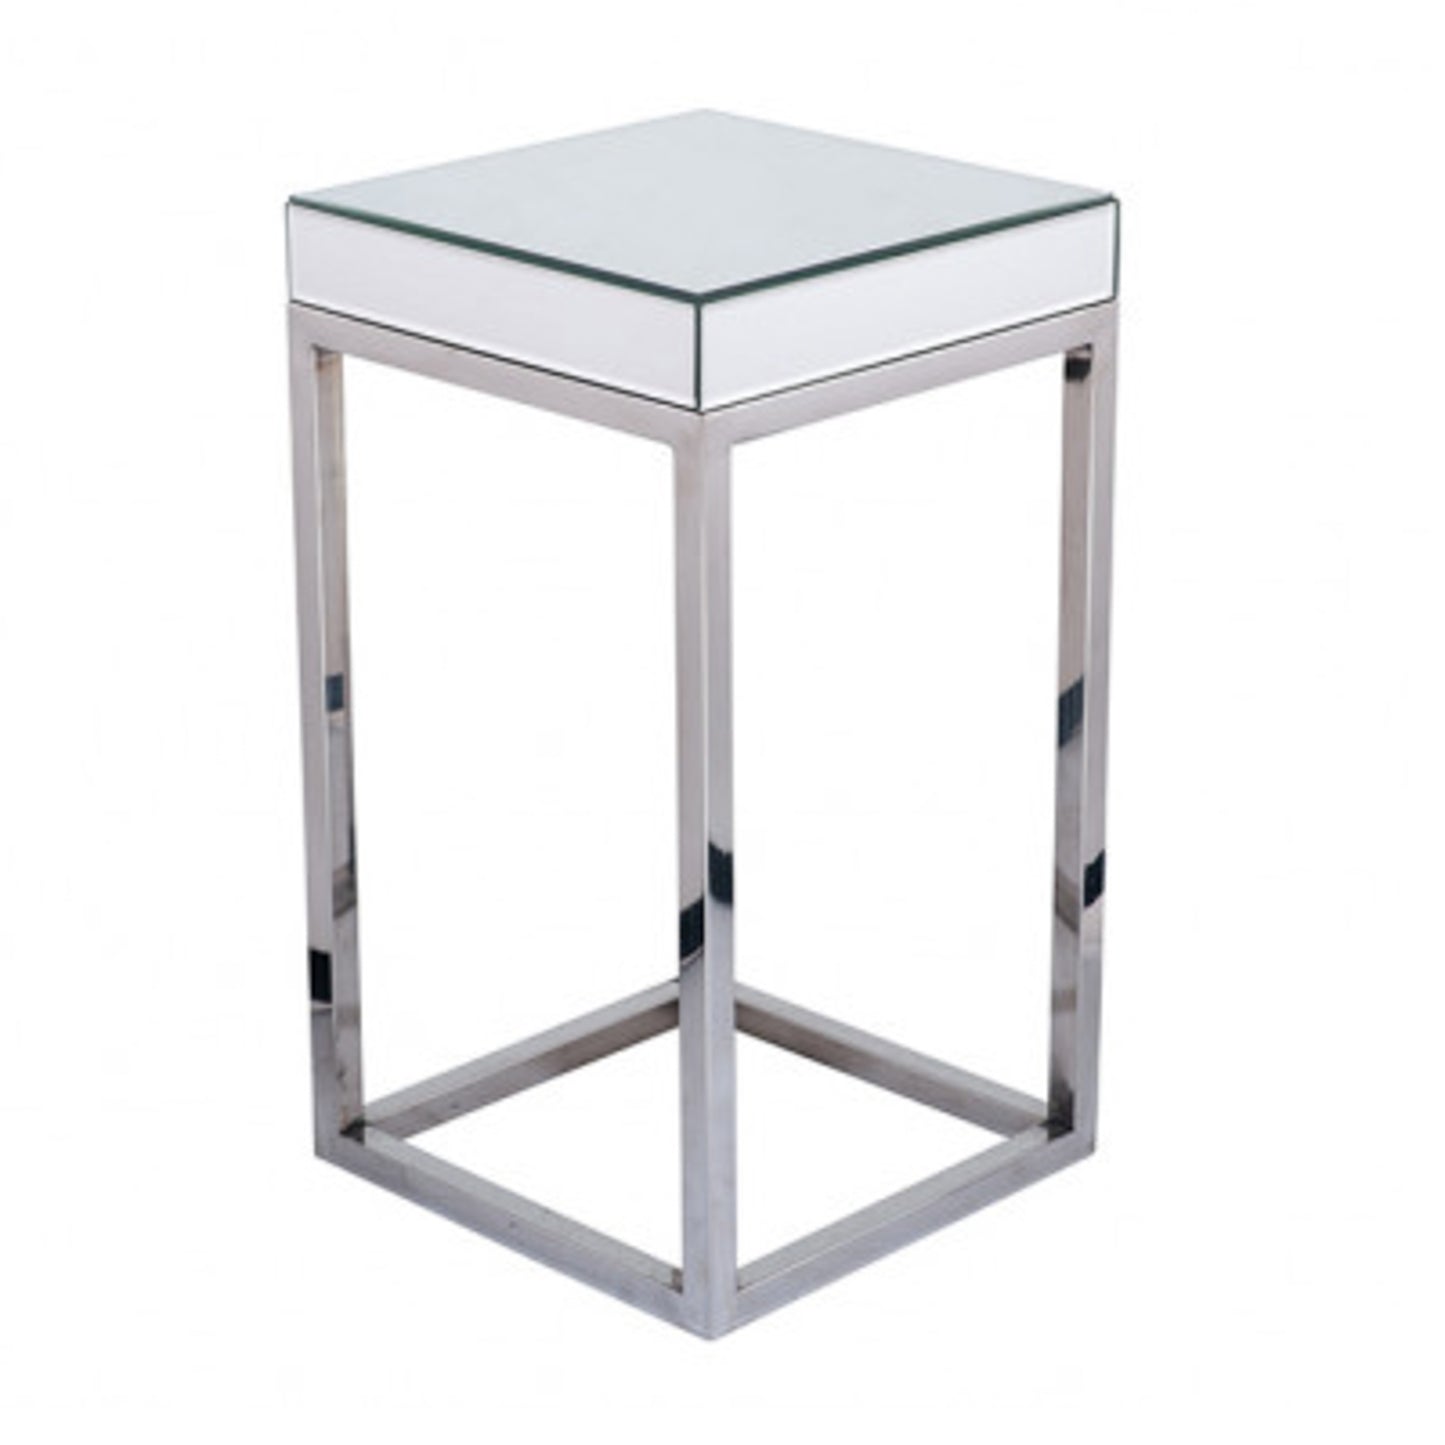 Rocca Mirrored Side Table